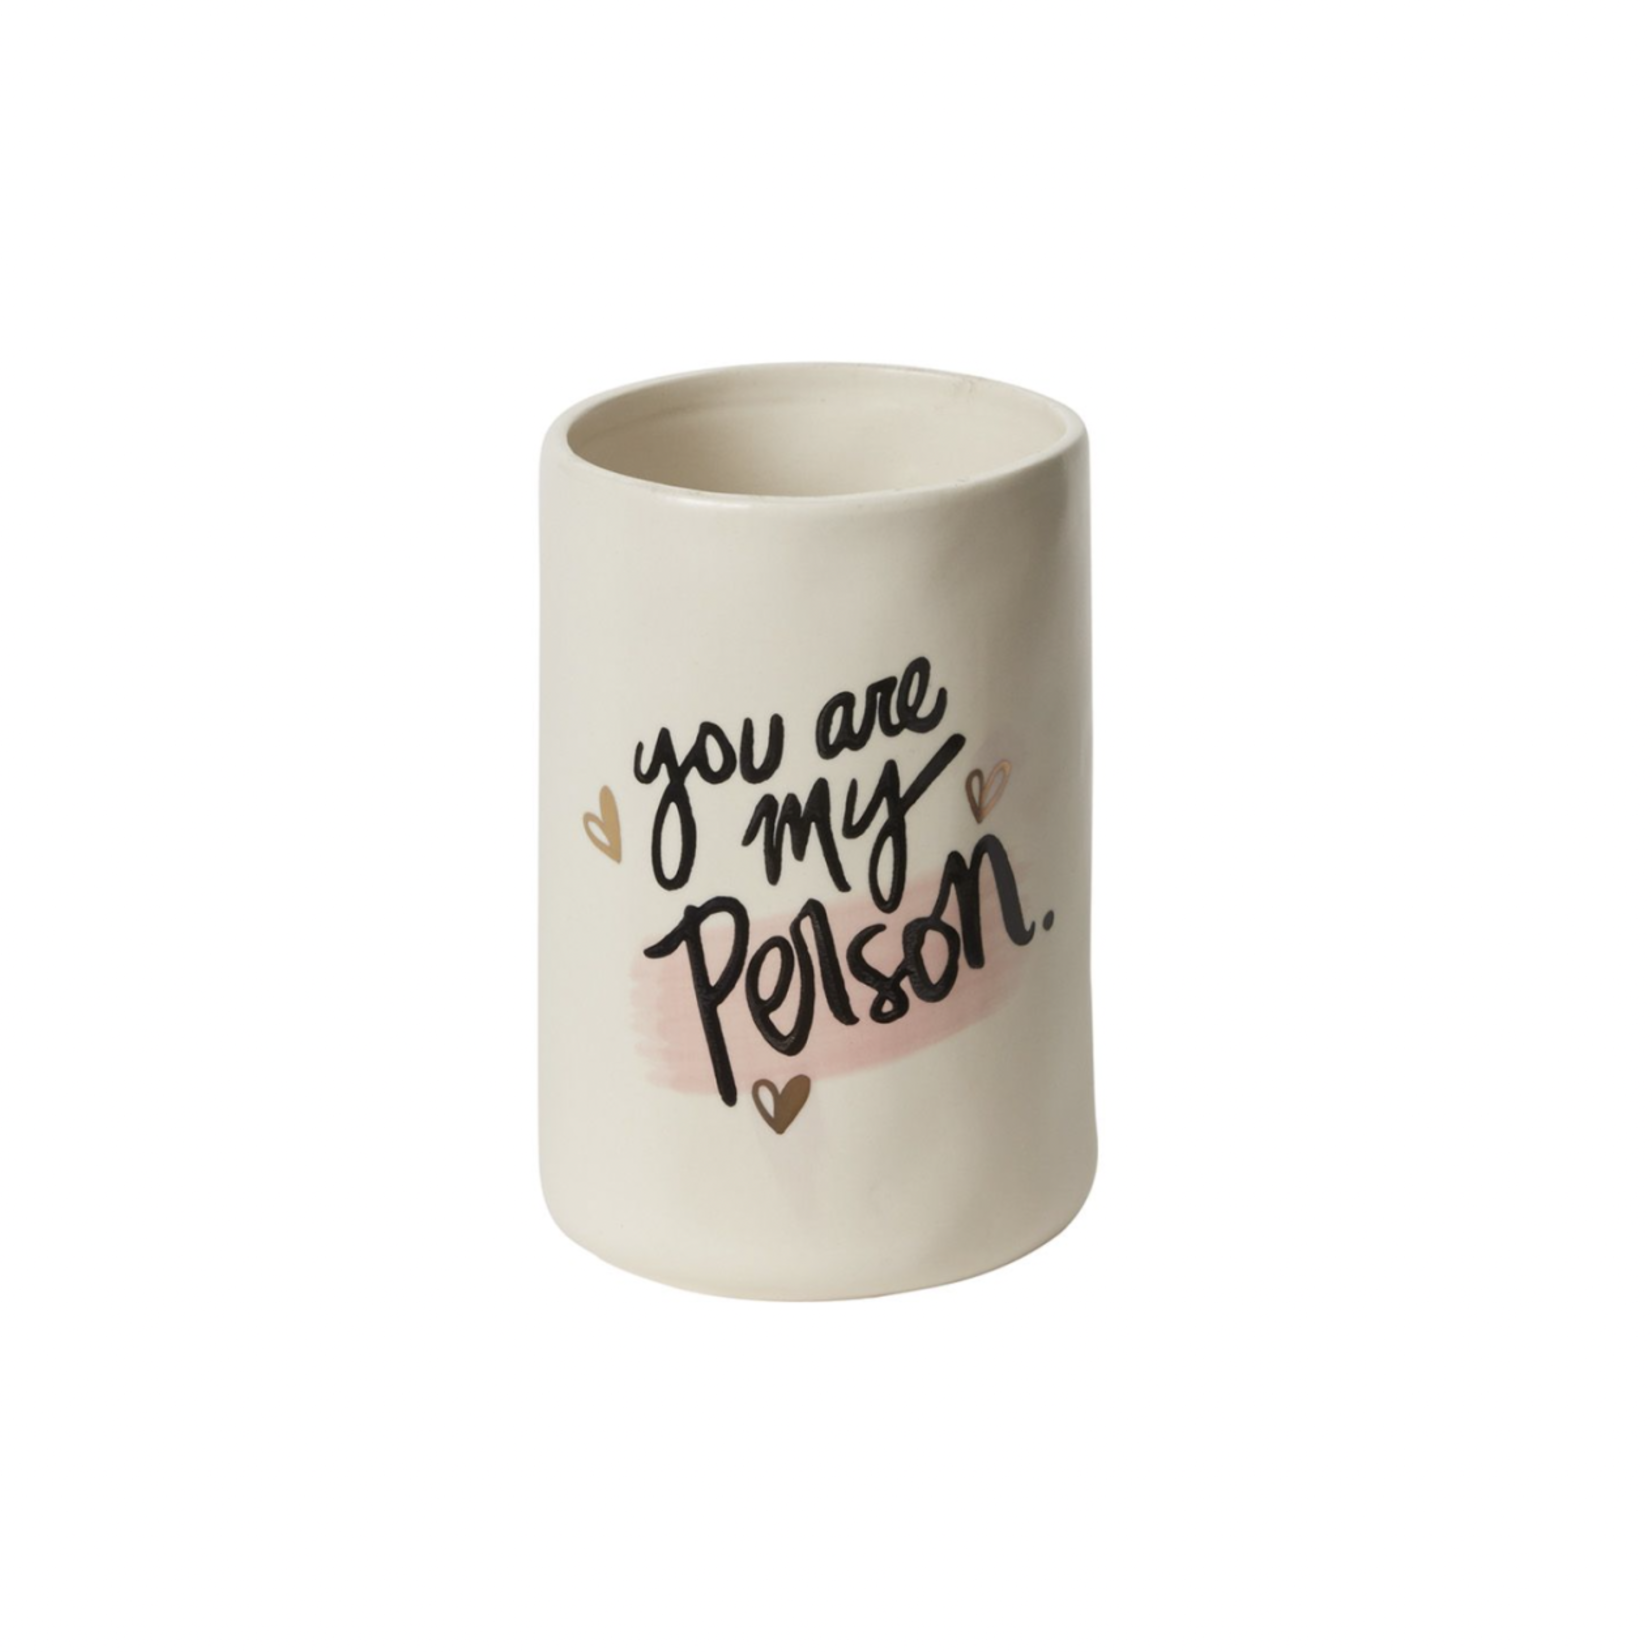 6.25"h x 4" WHITE CERAMIC CYLINDER "YOU ARE MY PERSON"